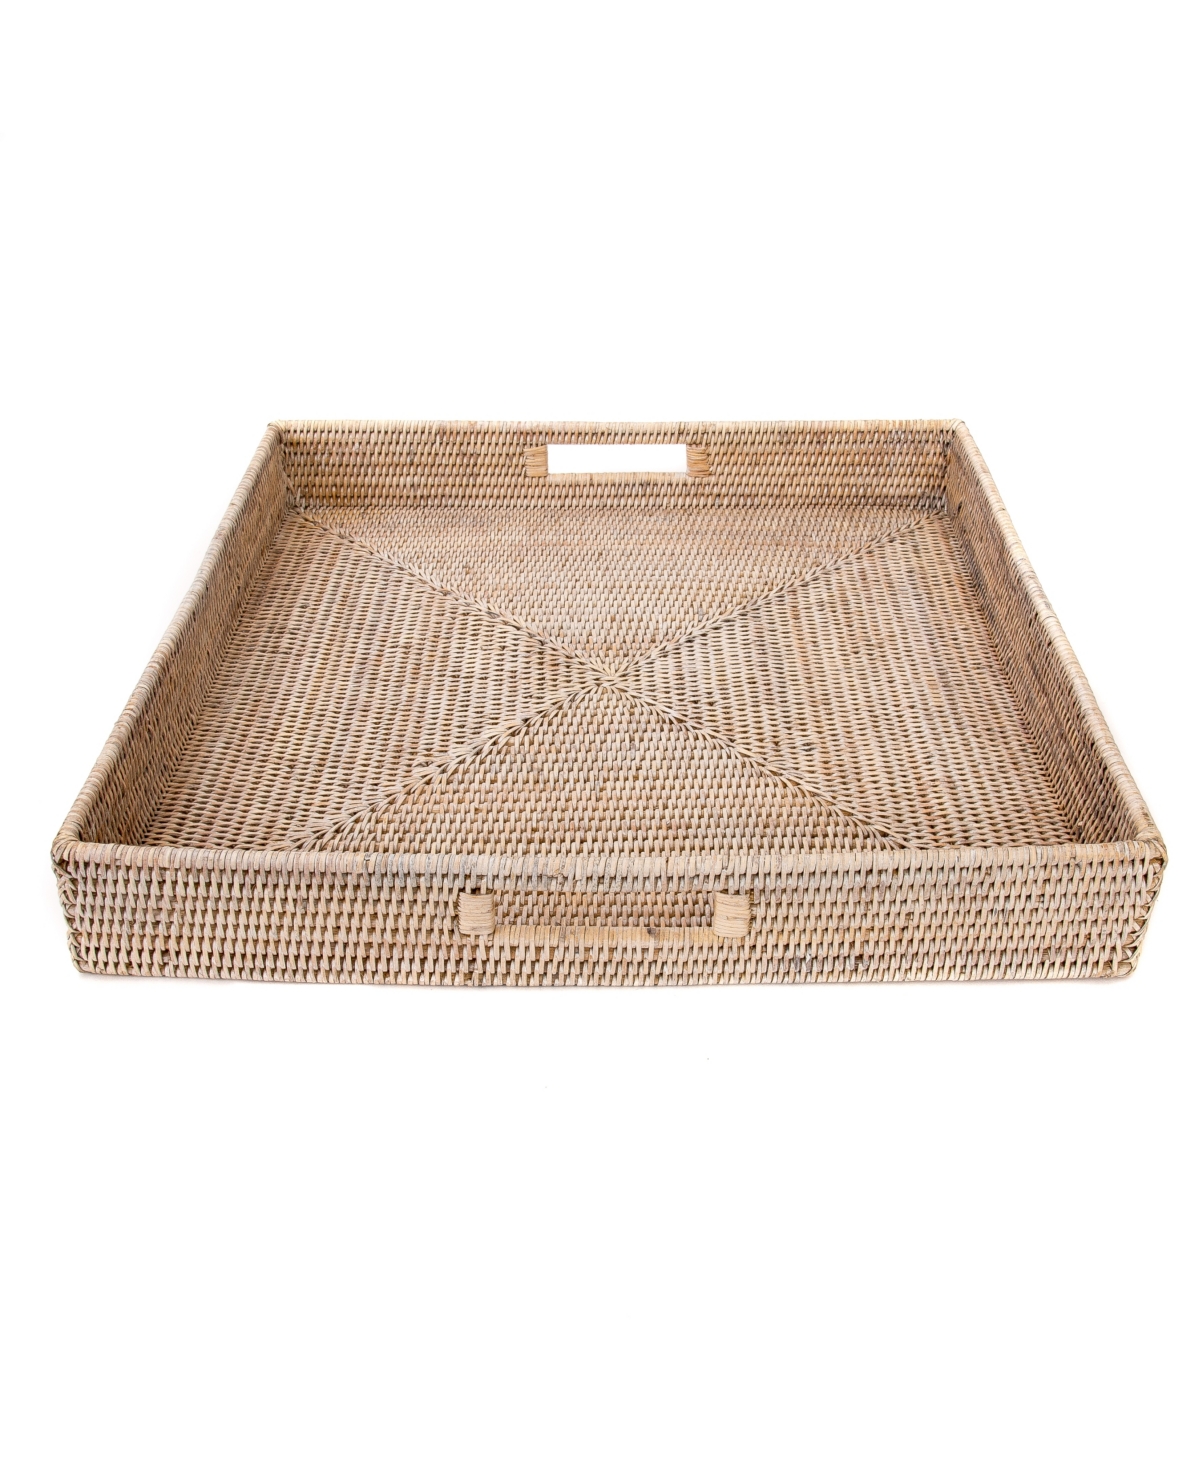 Artifacts Trading Company Artifacts Rattan Square Ottoman Tray In Off-white